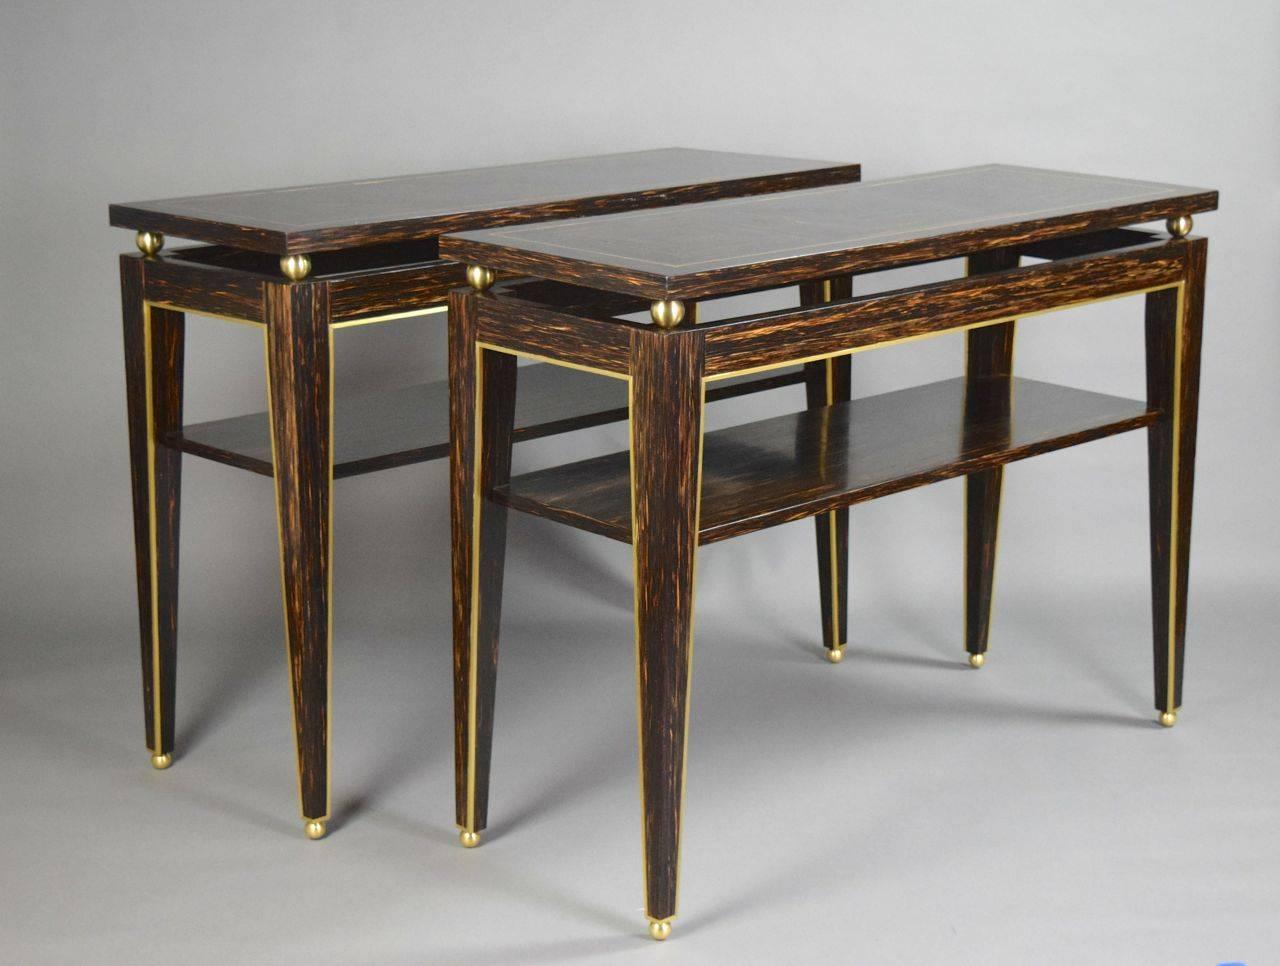 Each table has a rectangular parquetry top supported by spheres. The conforming apron leads to four square tapering legs fitted with a lower shelf. Of recent manufacture.